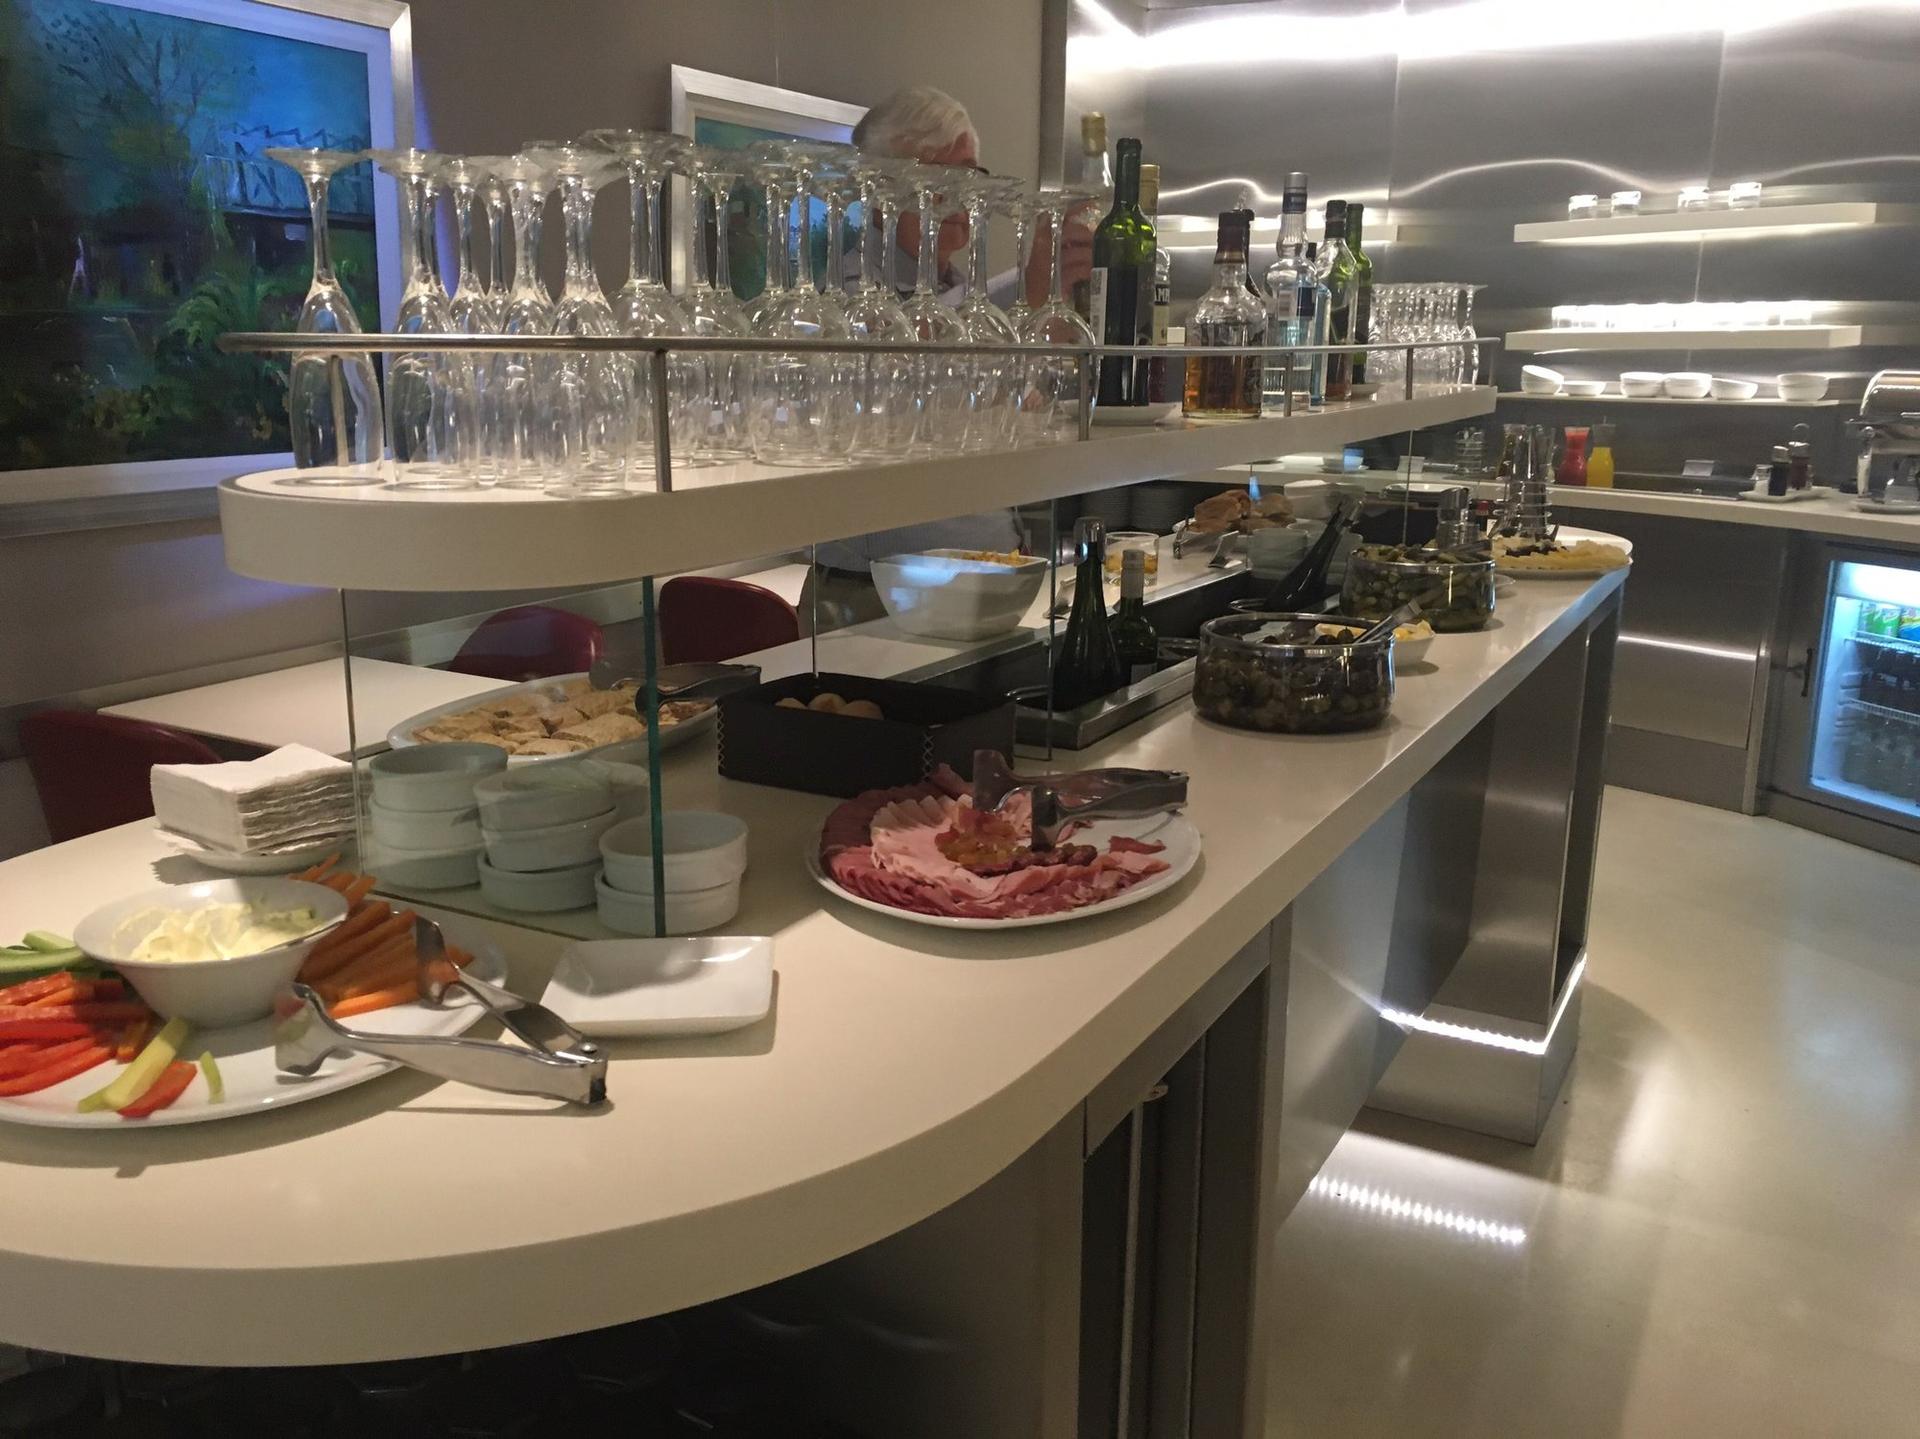 American Airlines Admirals Club & Iberia VIP Lounge image 7 of 18